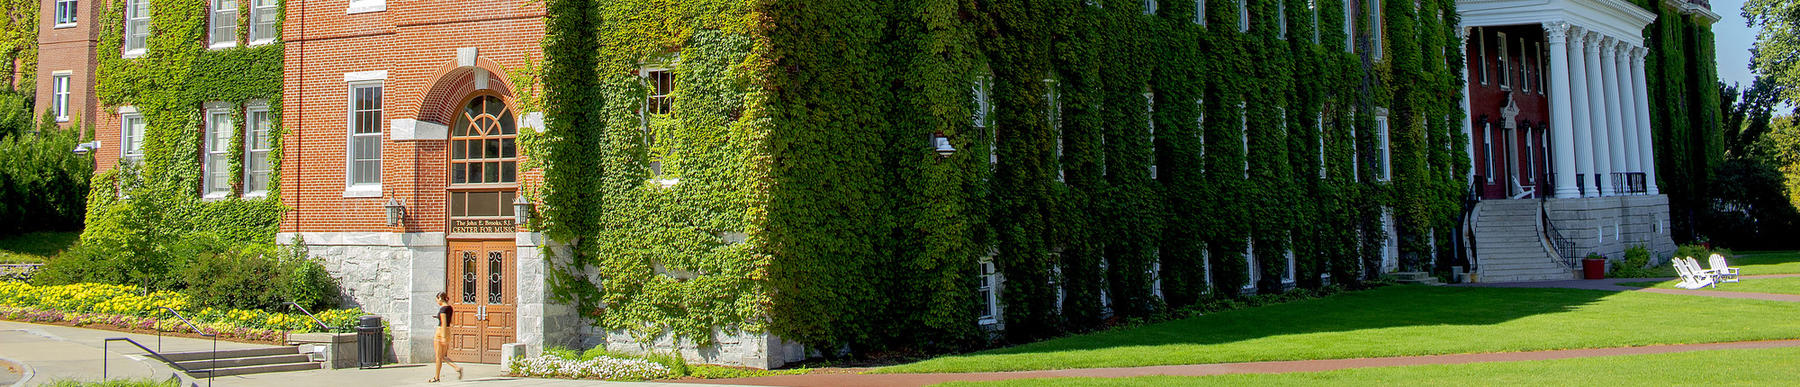 brooks hall and fenwick hall with green grass and ivy